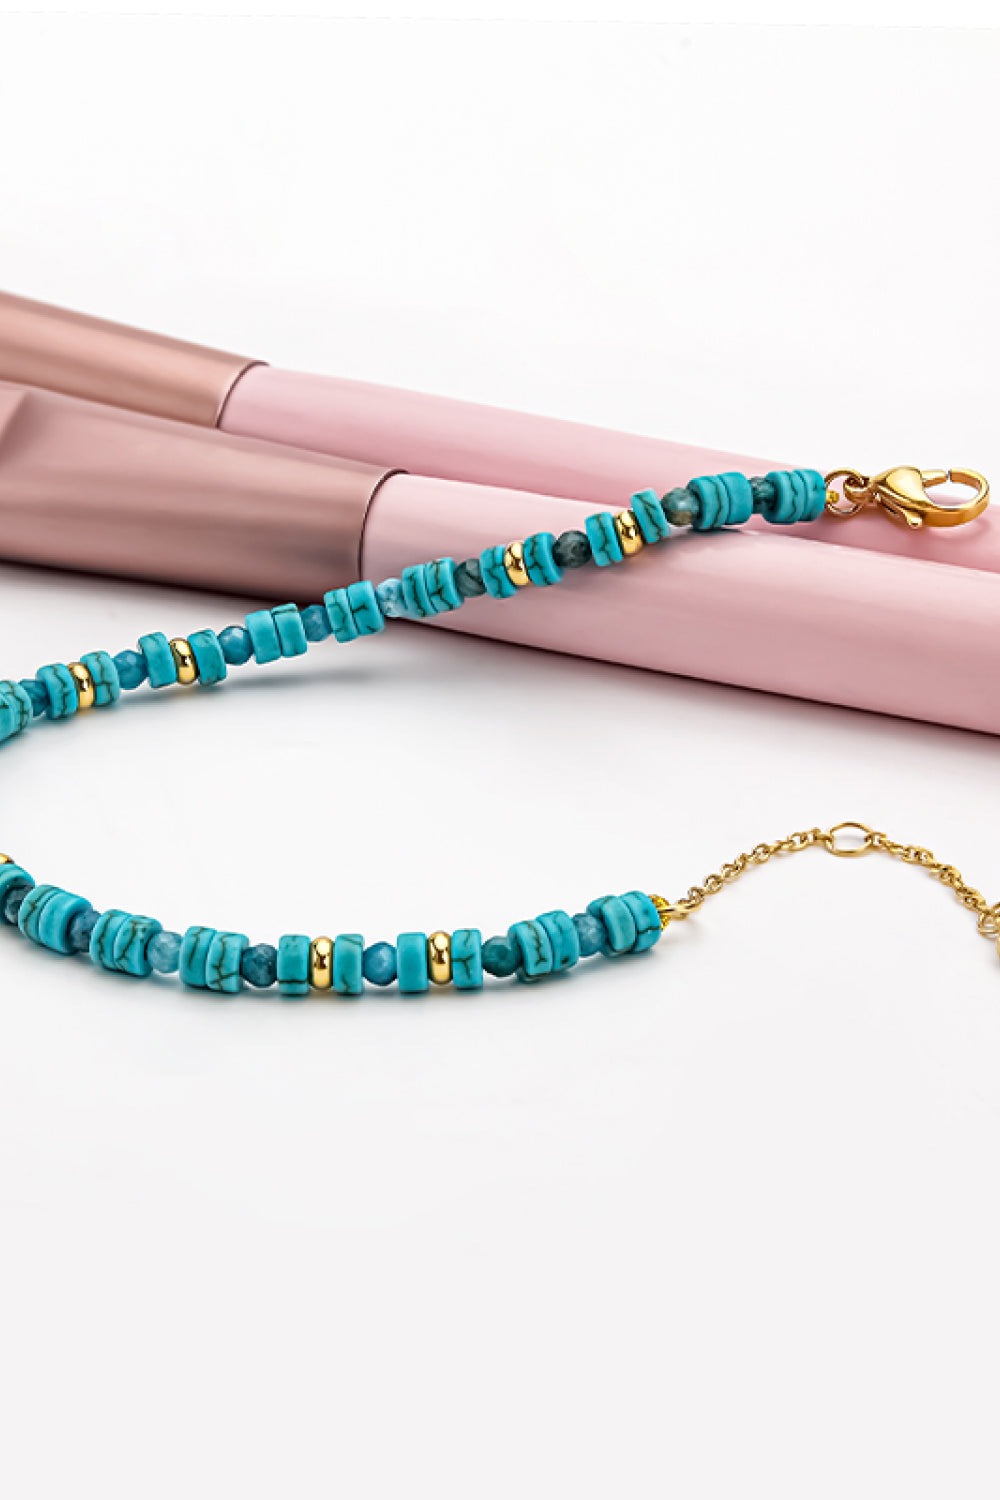 Turquoise Copper Bracelet - Kawaii Stop - 18K Gold-Plated, Adjustable Fit, Artistic Craftsmanship, Bracelet, Bracelets, Copper Bracelet, Elegant Design, Everyday Charm, Fashion Accessories, Fashion Statement, H.S, Natural Beauty, Nature-Inspired Jewelry, Personalized Style, Premium Quality, Ship From Overseas, Timeless Elegance, Turquoise Stone